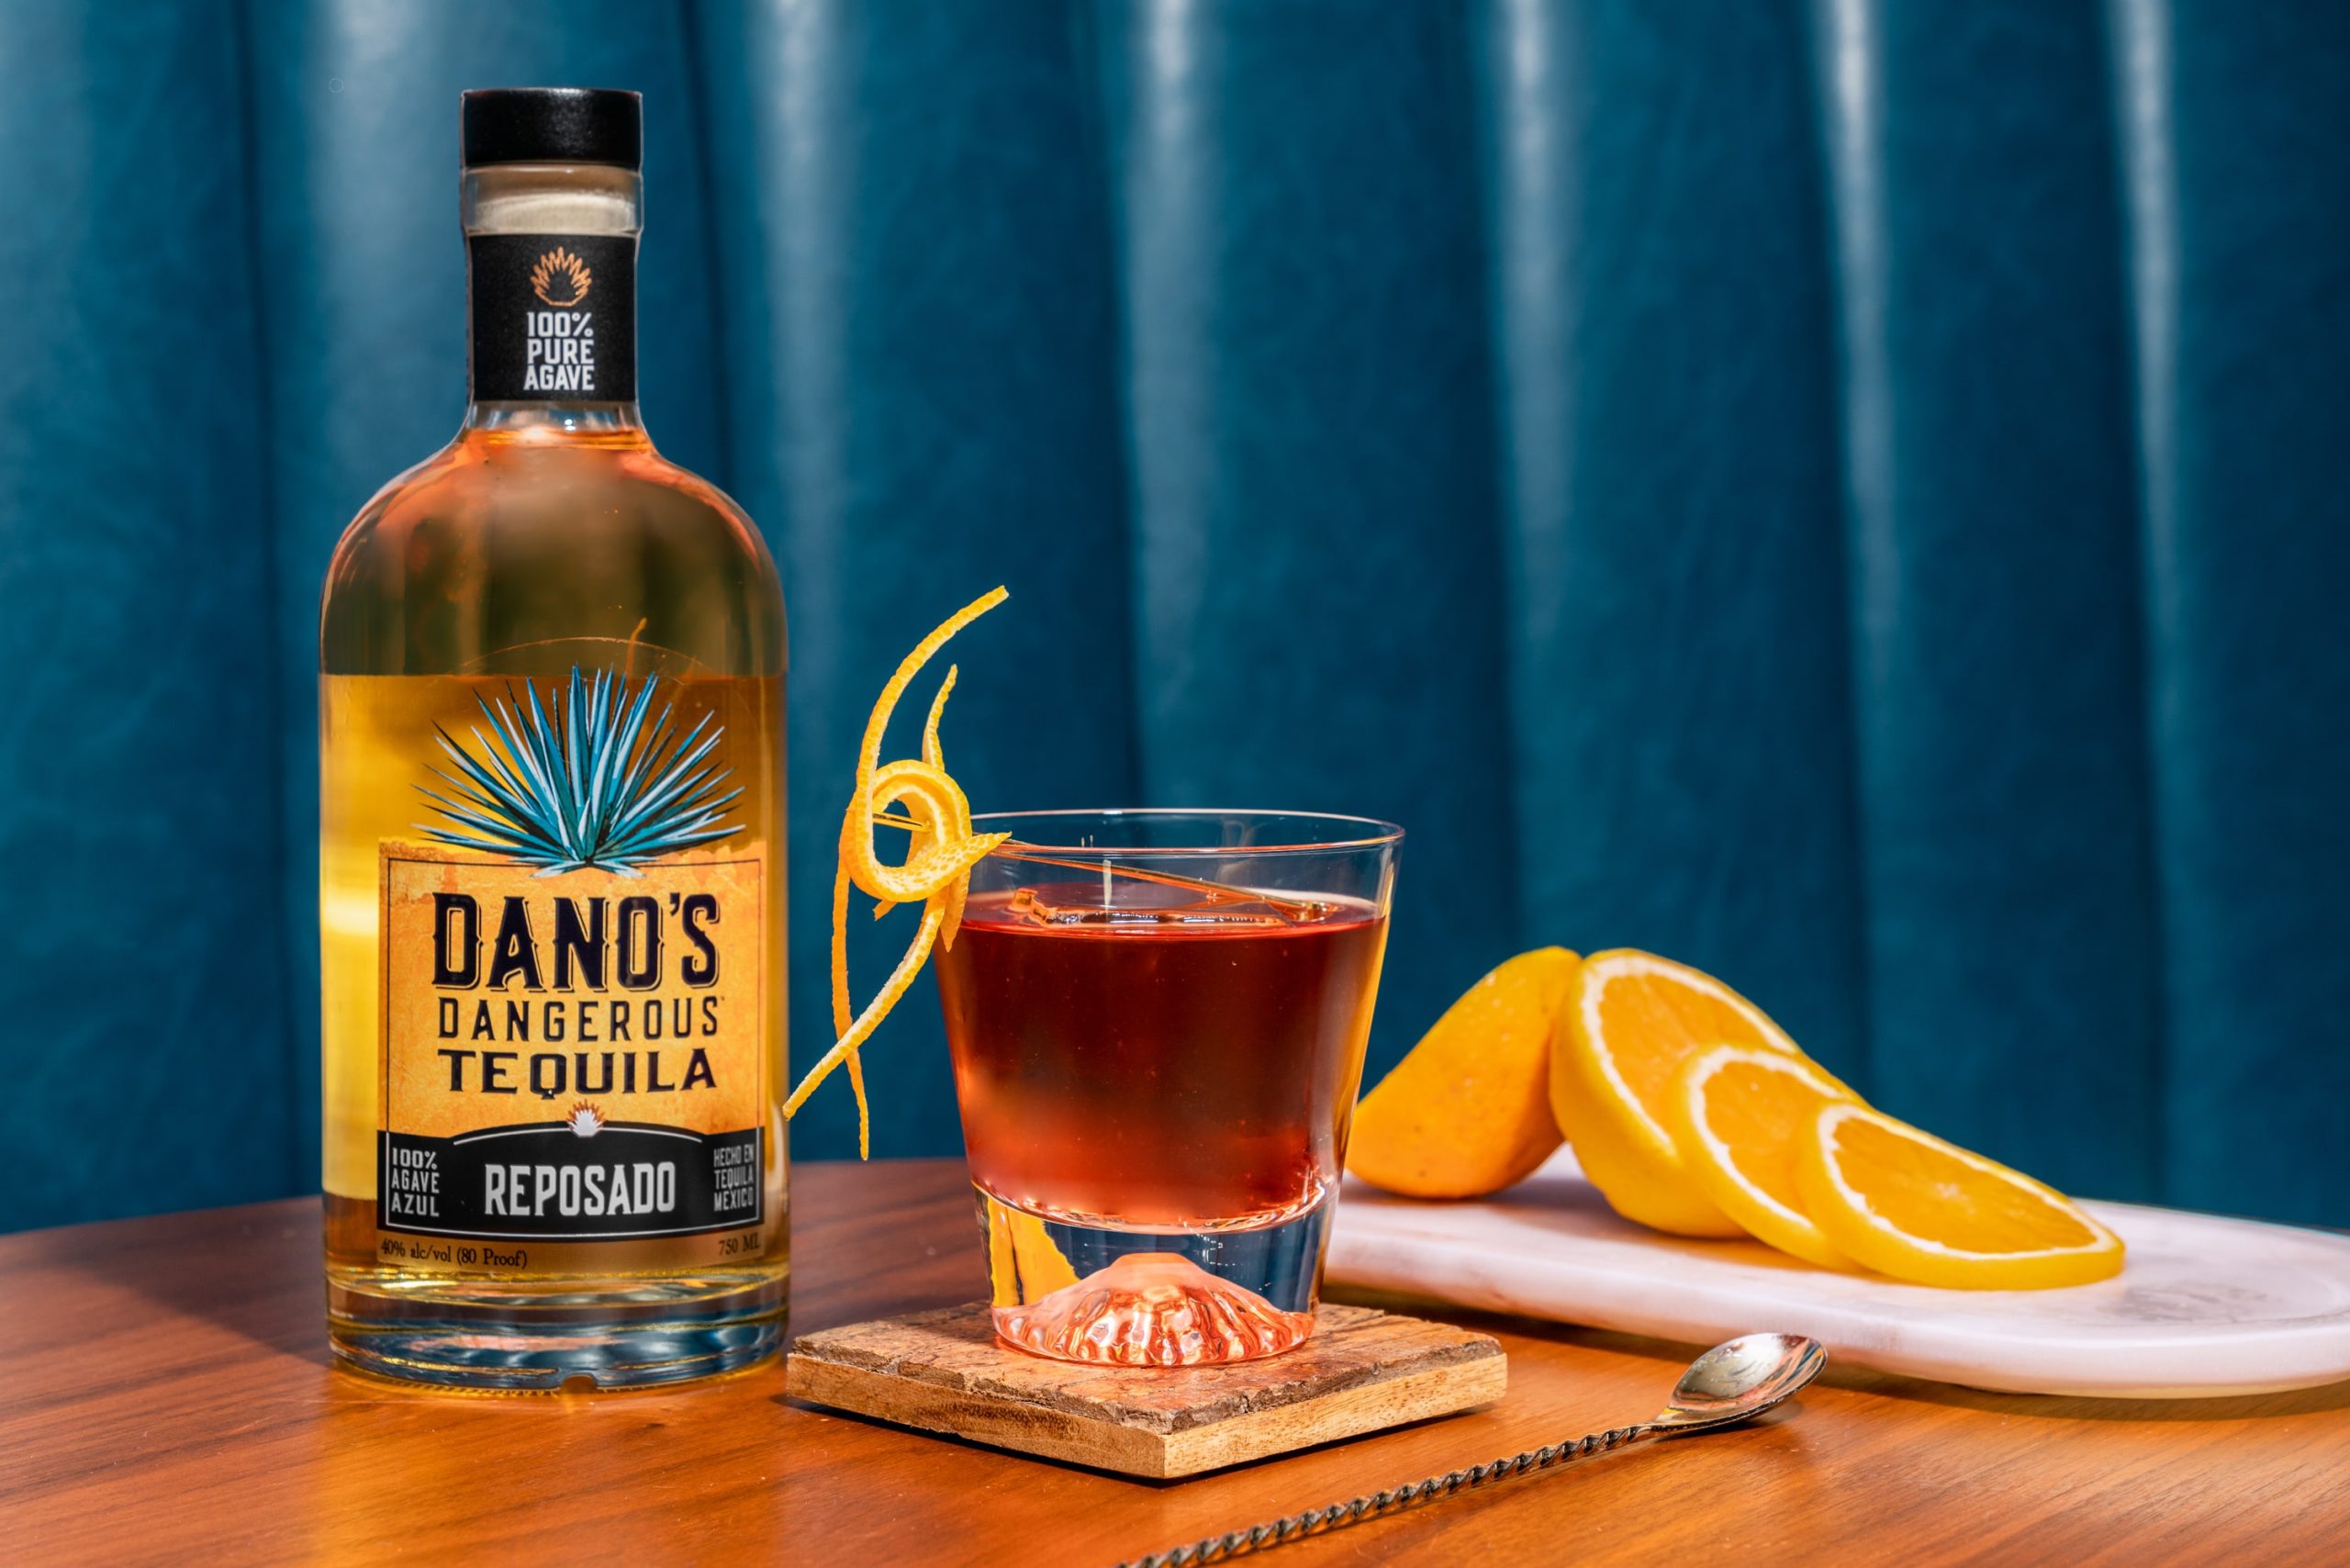 Dano’s Tequila Reposado is a no-frills tequila with surprising depth in its production: Photo courtesy of Dano’s Tequila